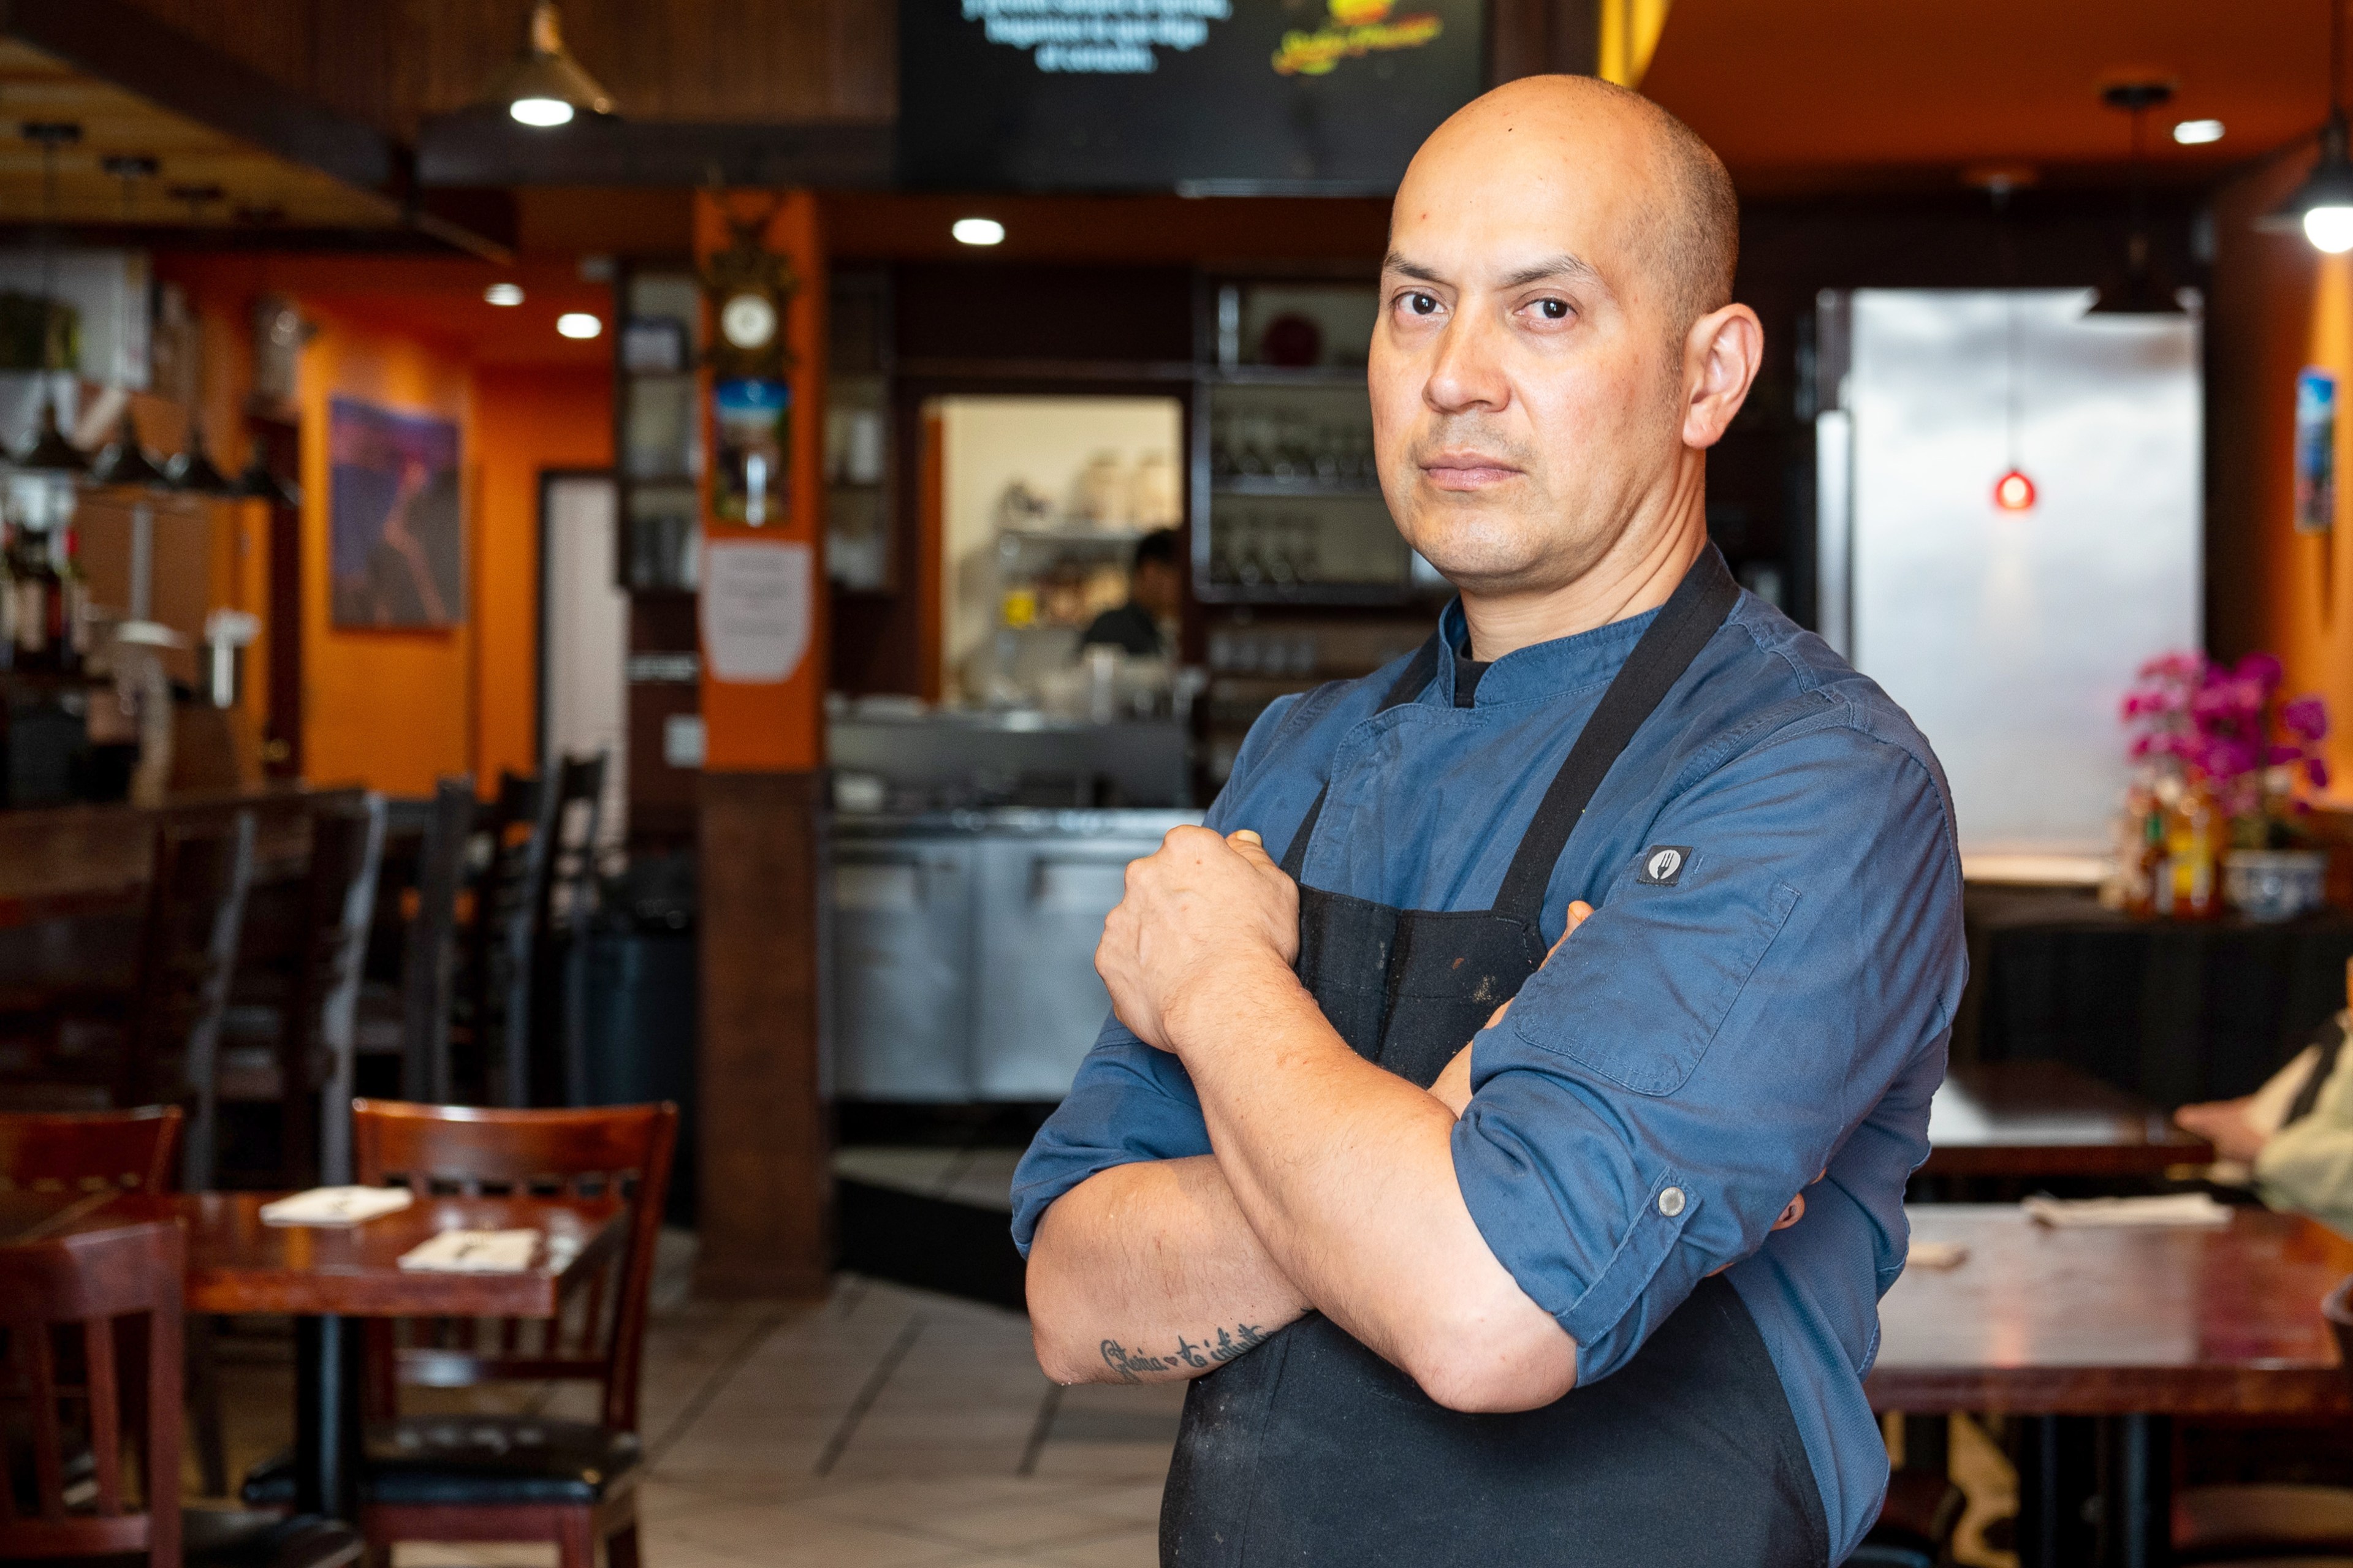 A man wearing a blue chef coat and black apron stands confidently in a warmly lit restaurant, which features wooden chairs, tables, and orange walls.